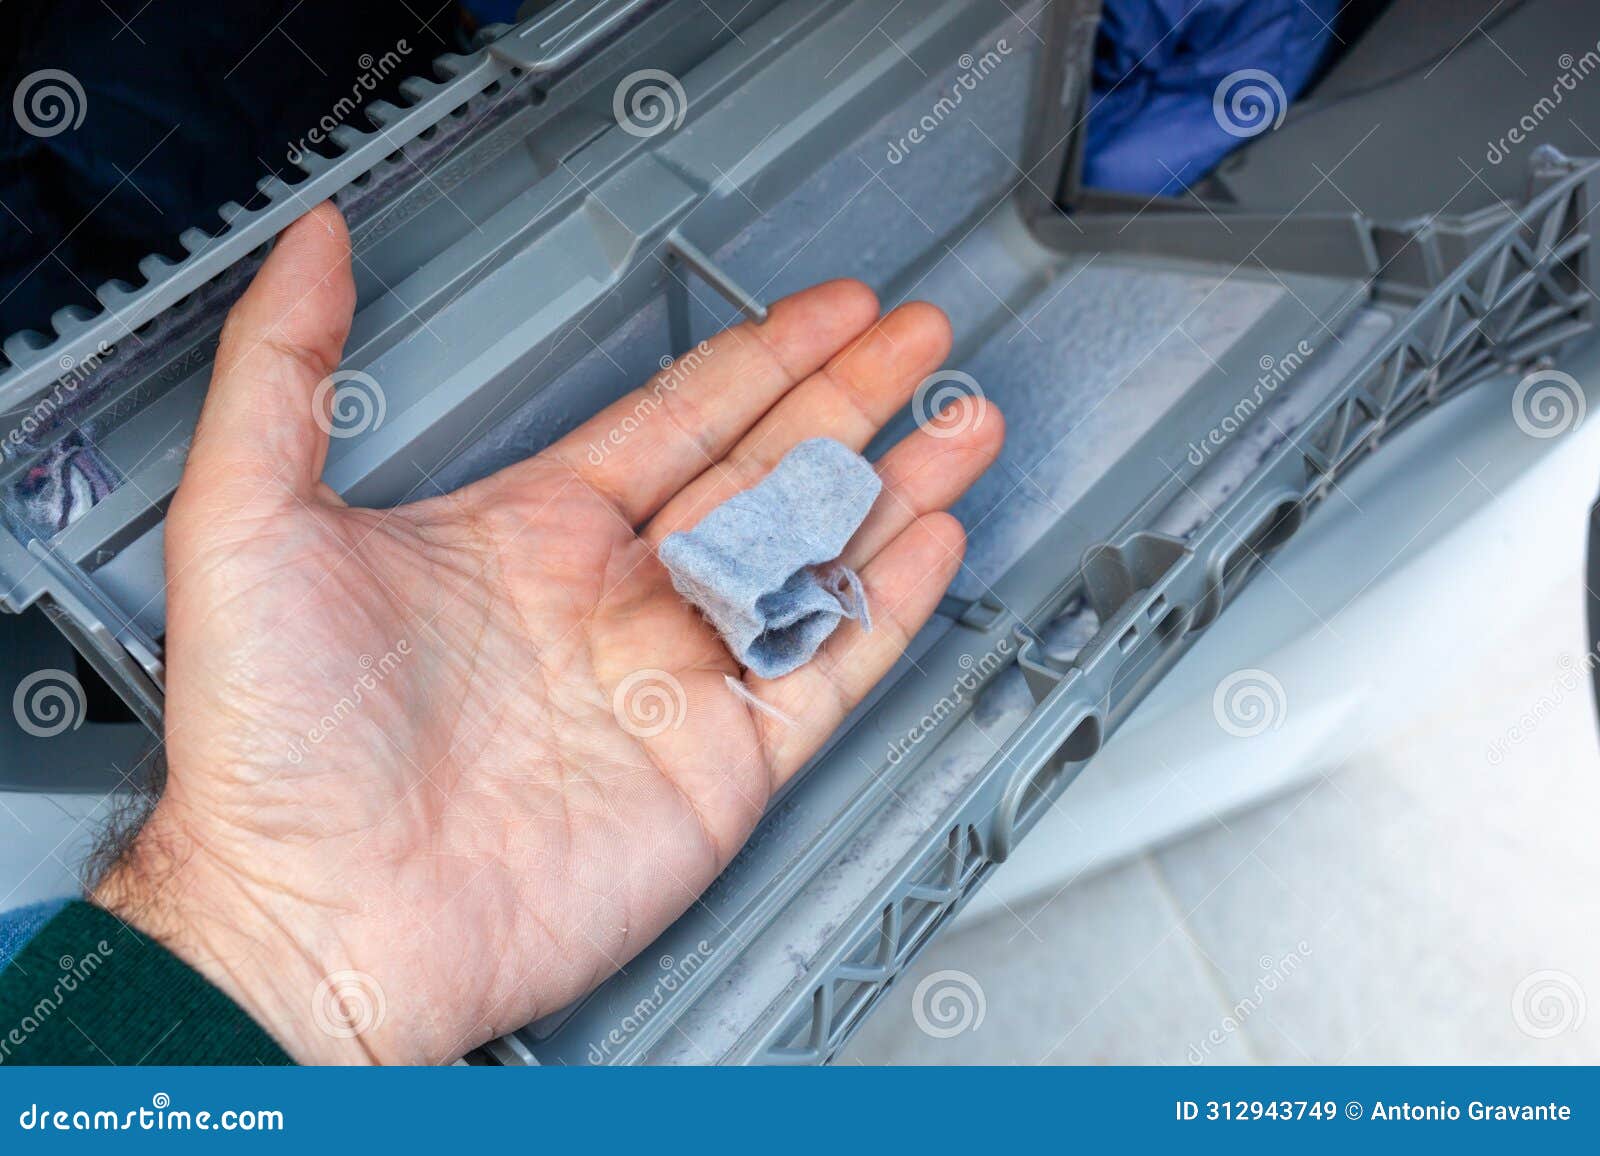 hand removing lint from a clothes dryer filter, home maintenance